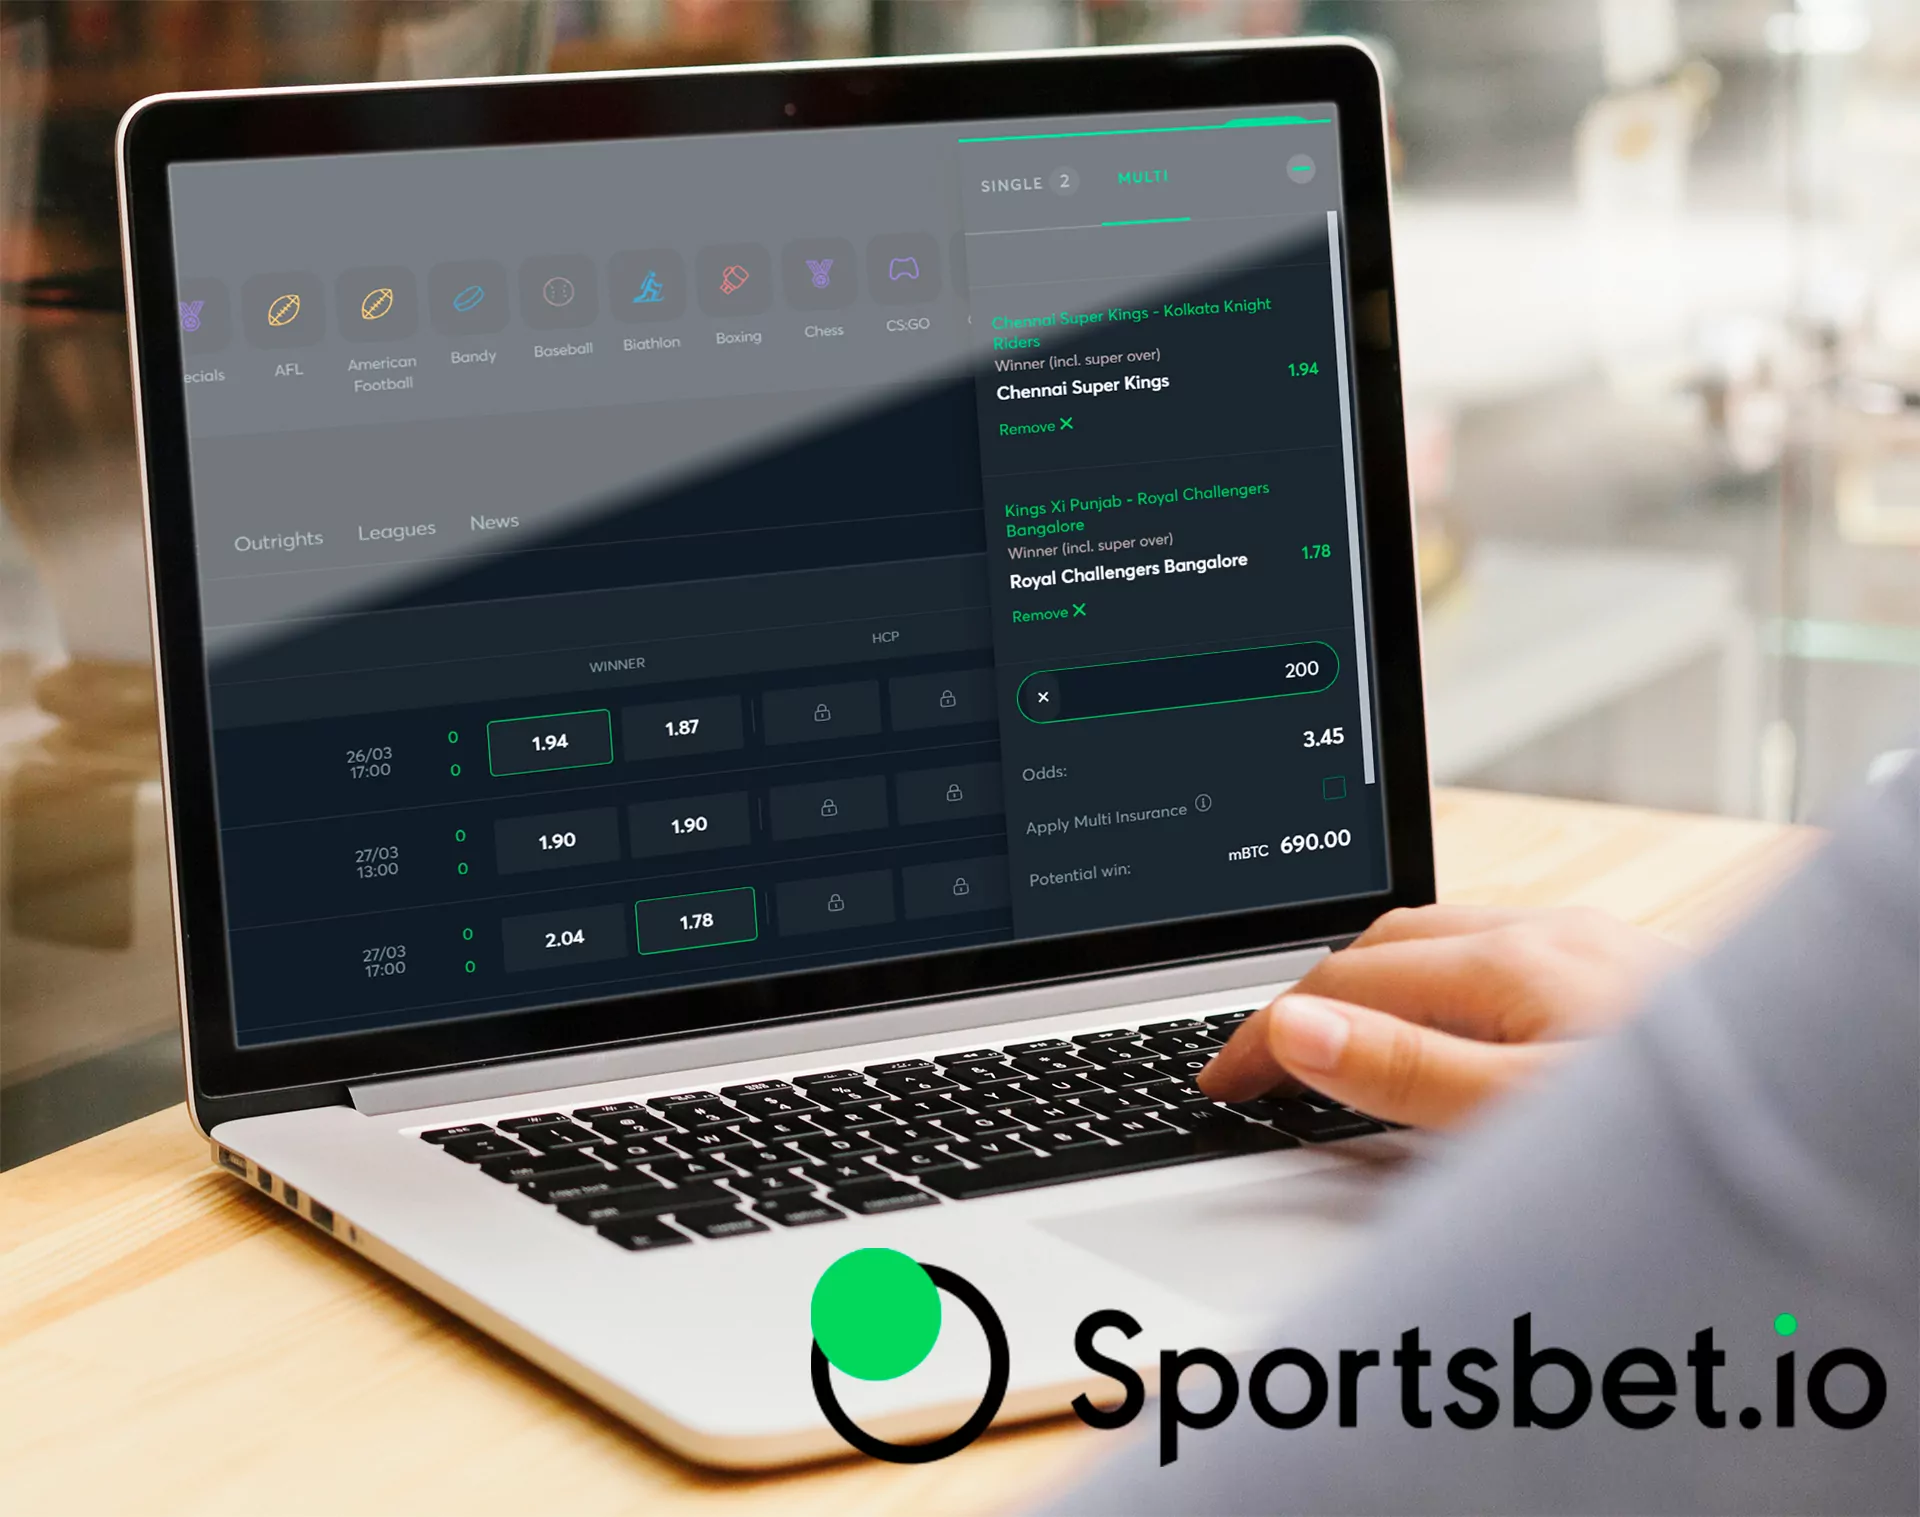 It's easy to start betting at Sportsbet.